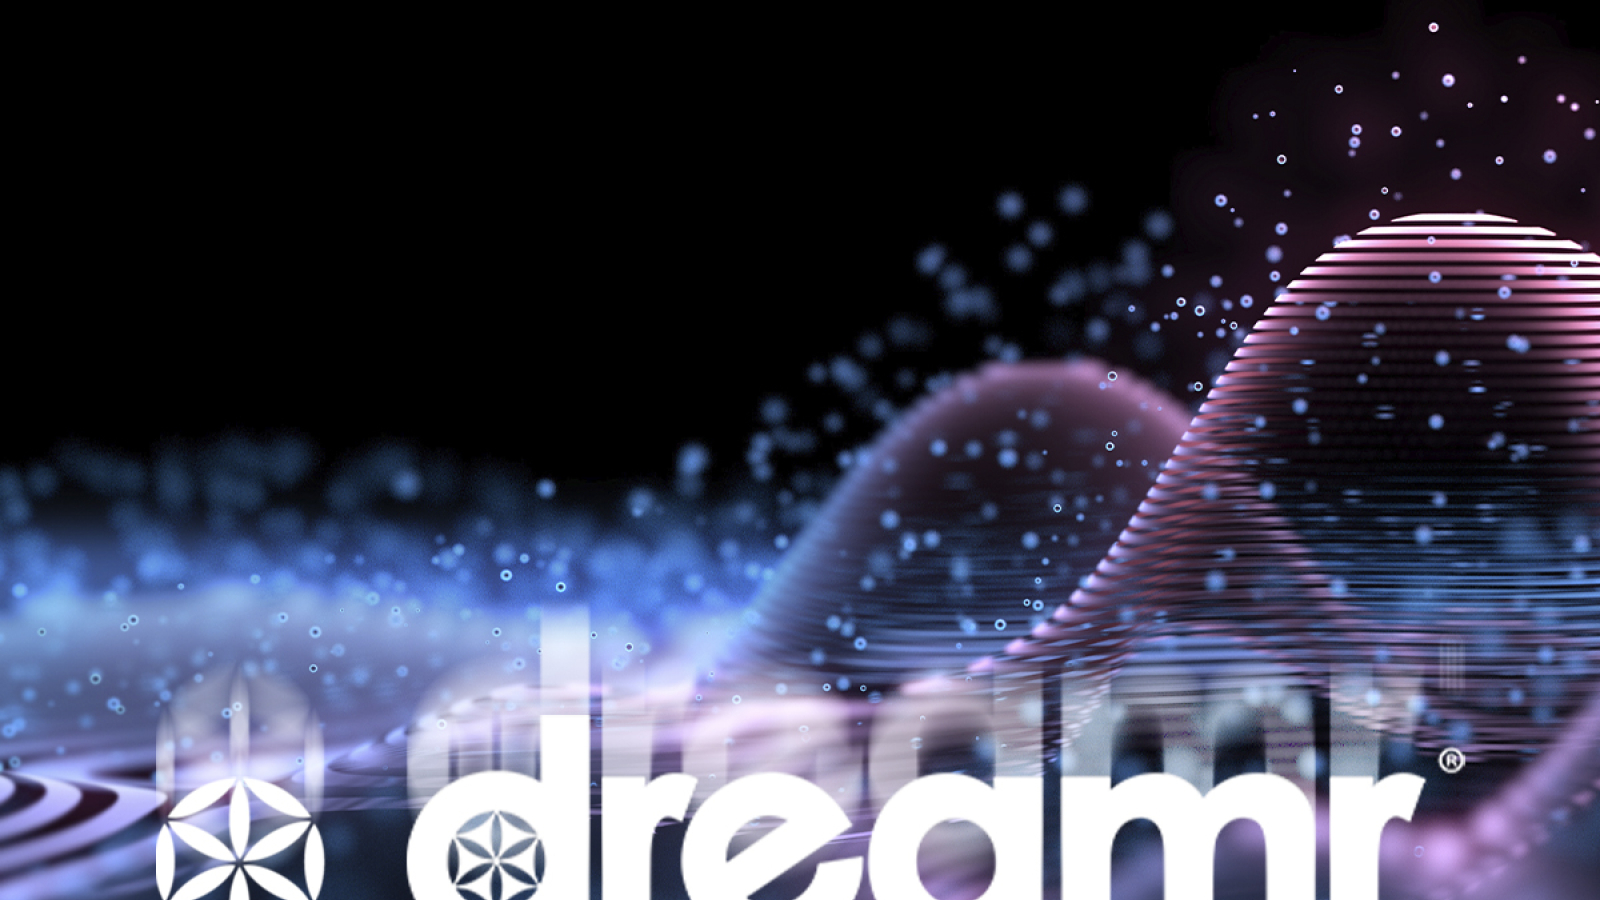 Dreamr Raises $2 Million to Build Ecosystem of Social Networking and DeFi Tools